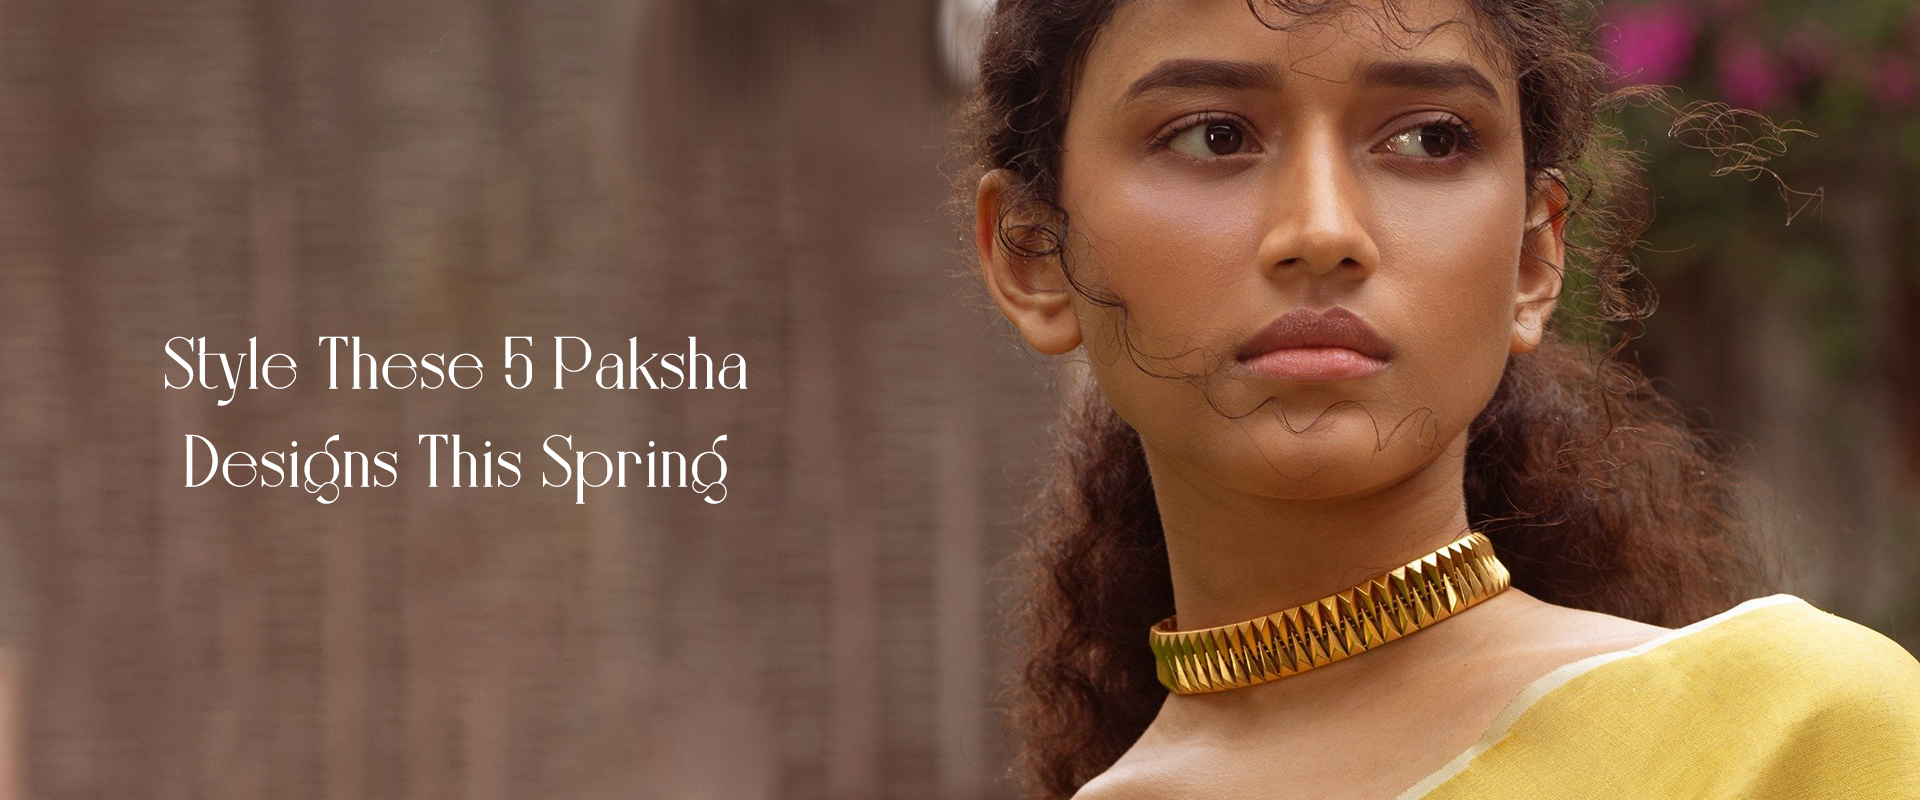 Style These 5 Paksha Designs This Spring